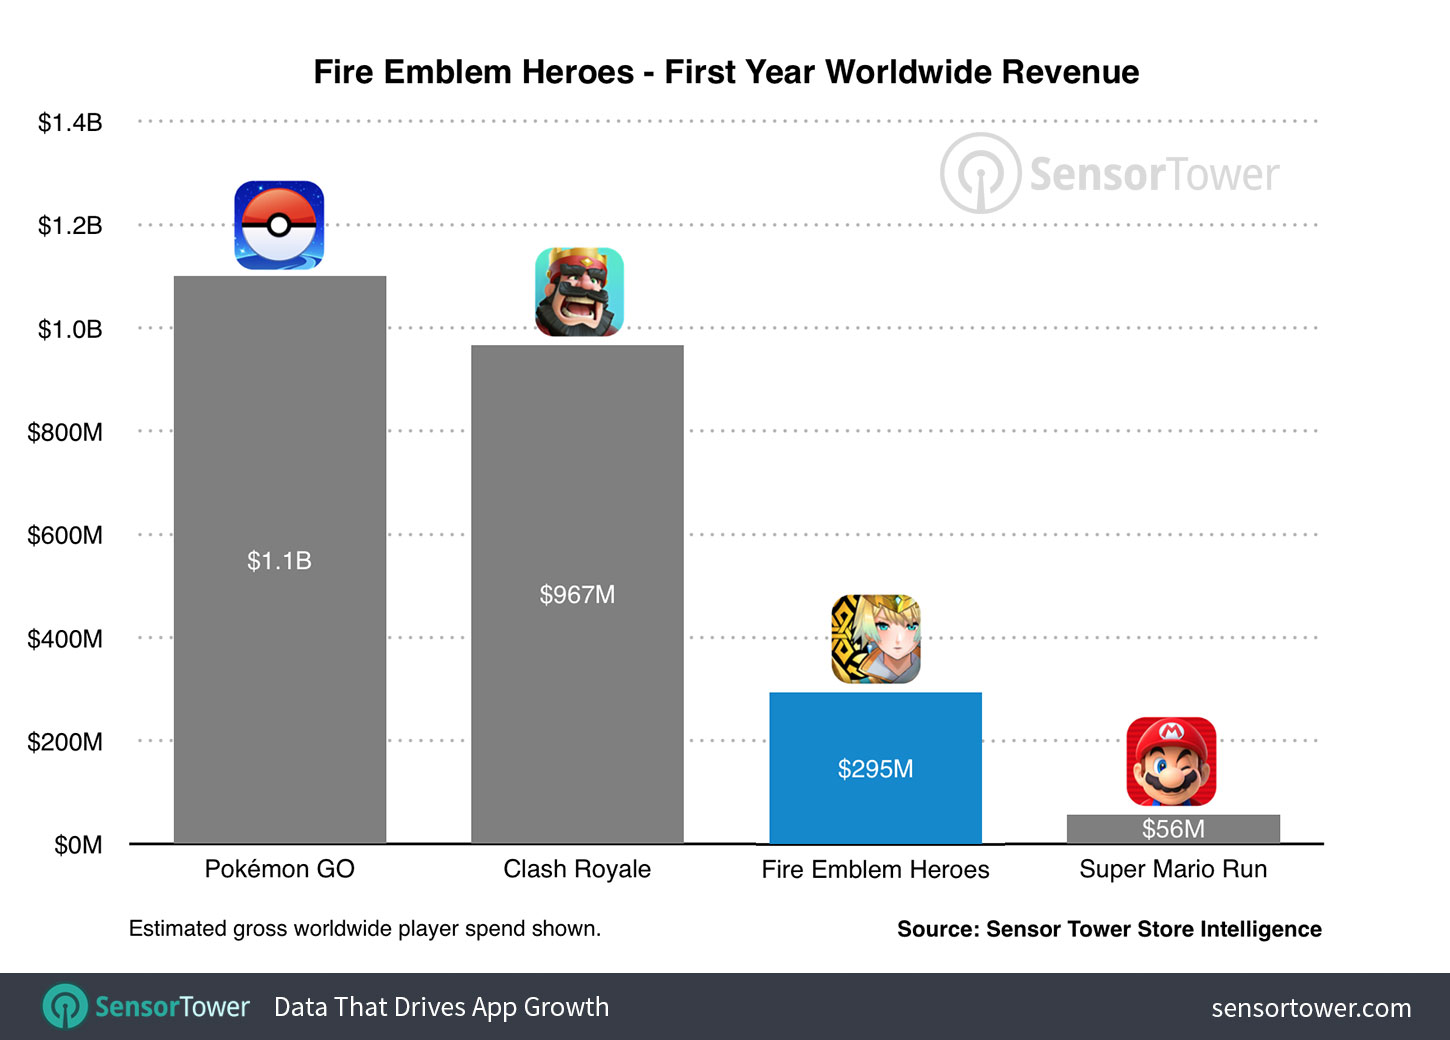 Sensor Tower Data Says 'Fire Emblem Heroes' Made Over $200 Million More Than 'Super Mario Run'